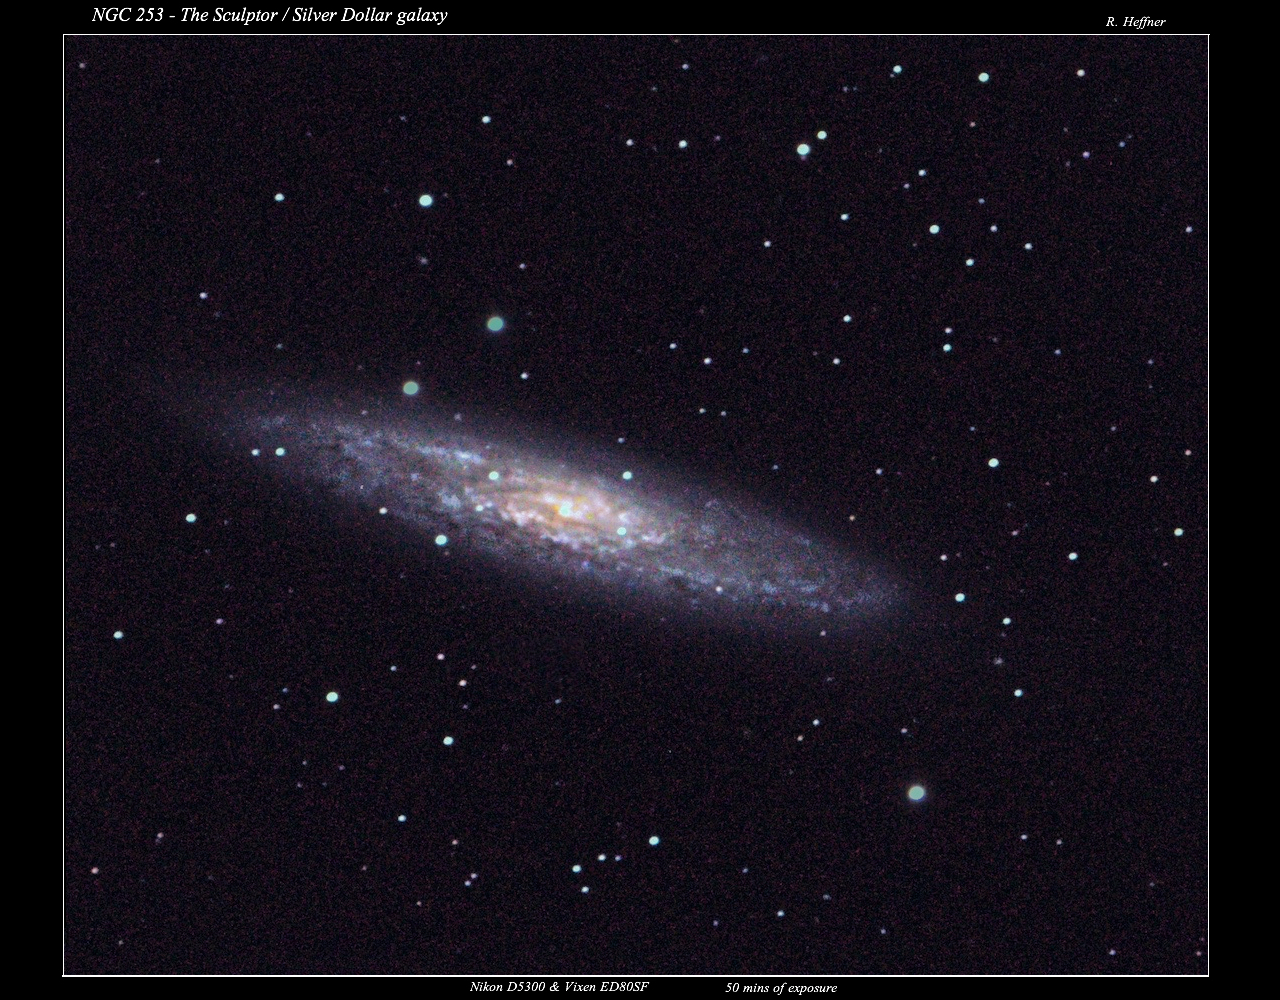 51314: NGC 253 Sculptor Galaxy - with Vixen ED80SF（強風の中） by